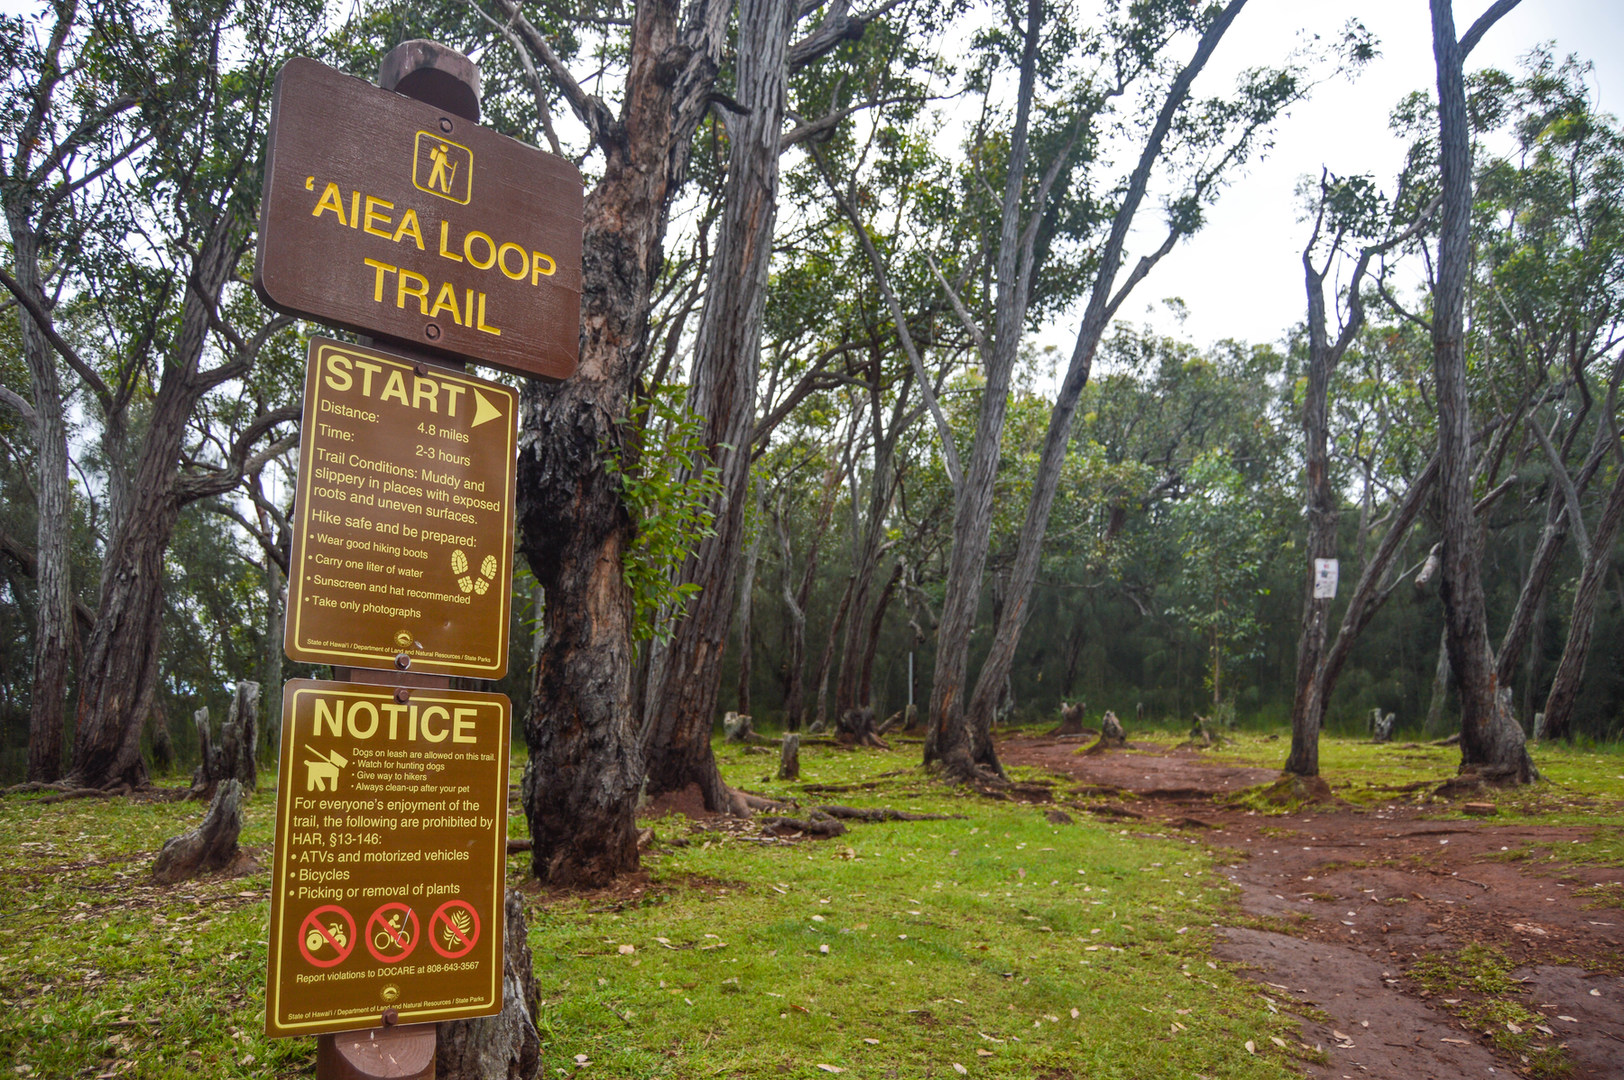 Image result for aiea loop trail bomber wing